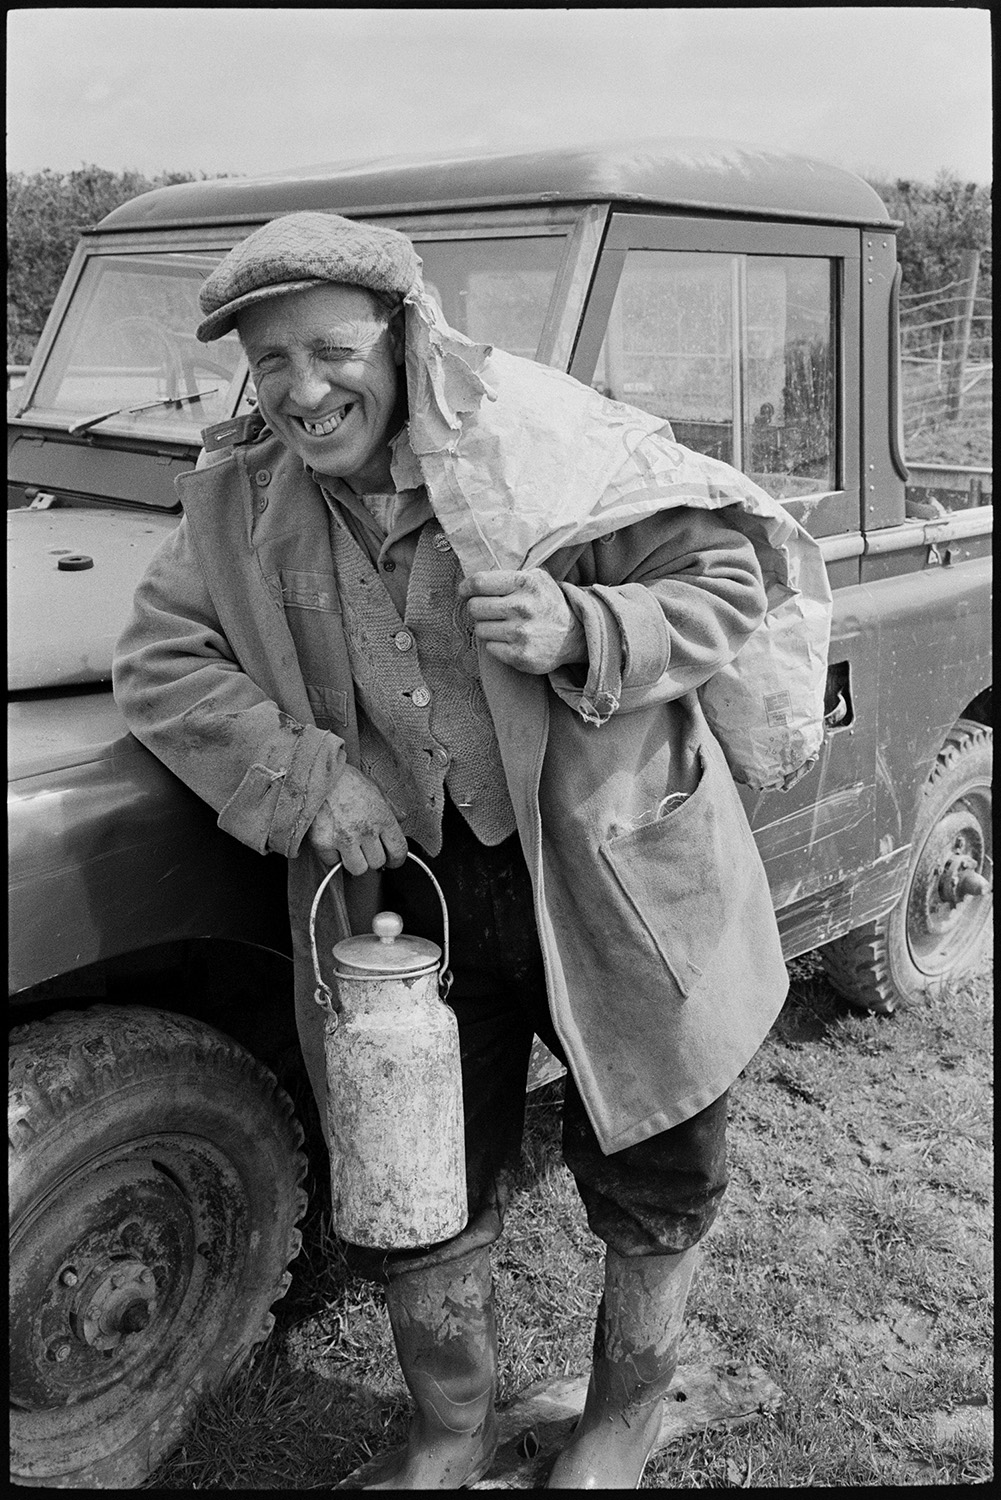 Farmer leaning against Land Rover, wearing cap, carrying bag of feed and milk can. 
[George Ayre leaning against a Land Rover in a field at Ashwell, Dolton. He is carrying a sack over his shoulder and a milk can or billy can in his other hand. He is also wearing a flat cap.]